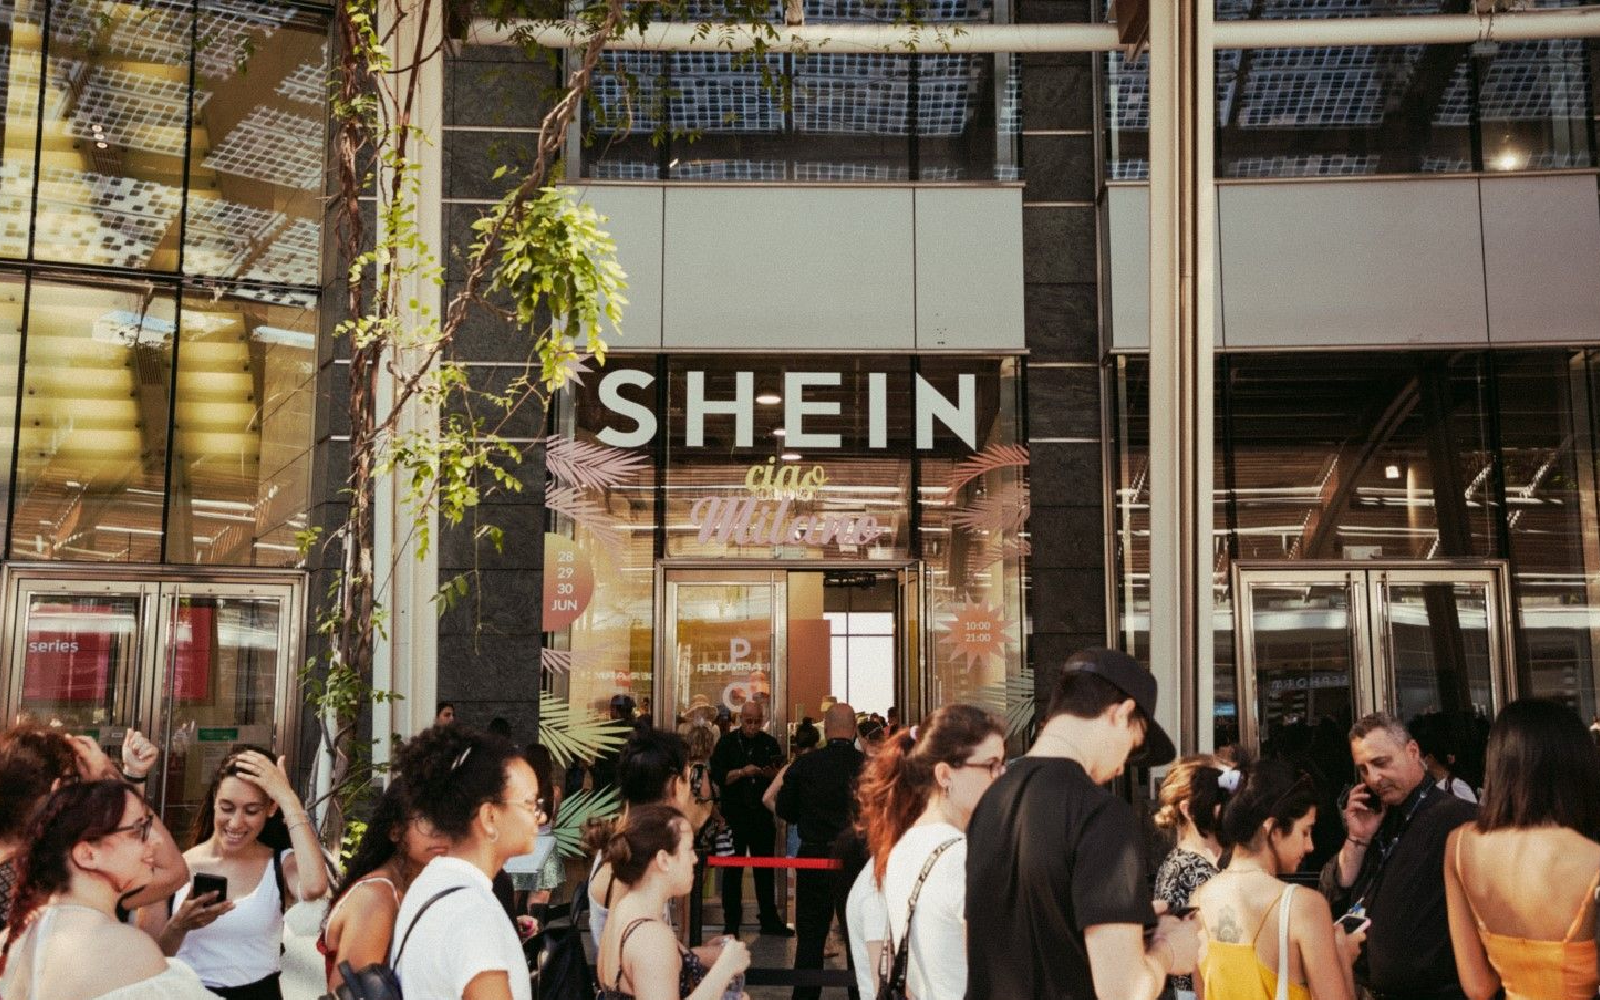 Shein's employees earn less than 50 cents per hour